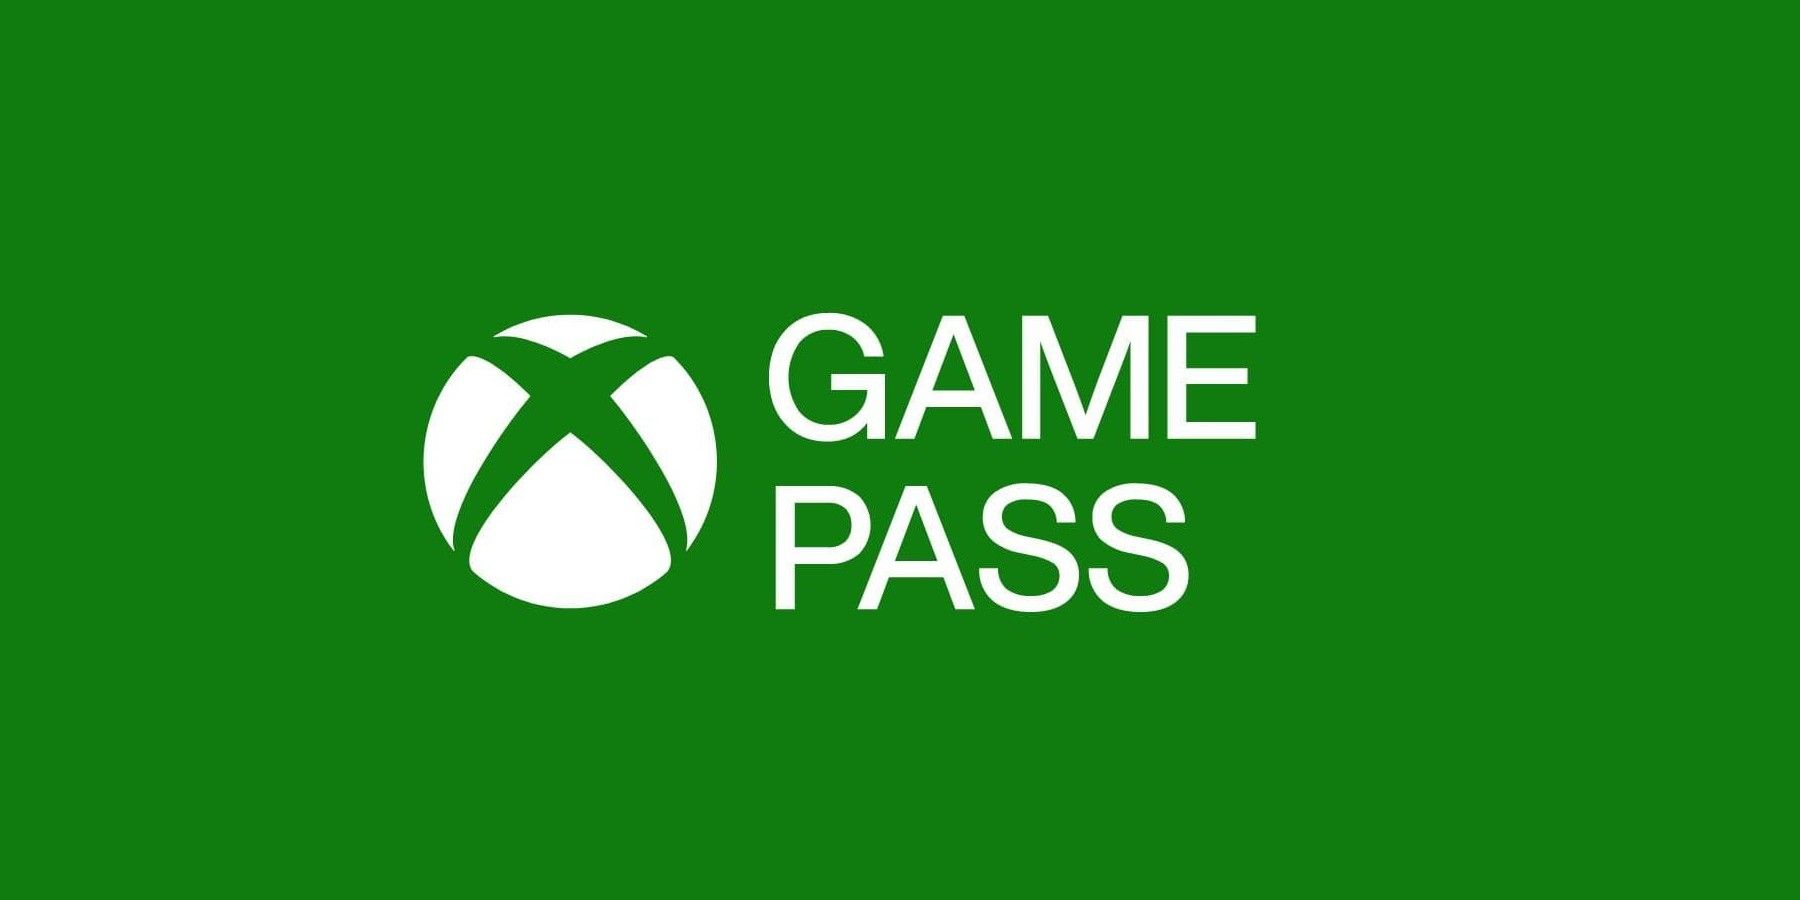 xbox game pass without the word 